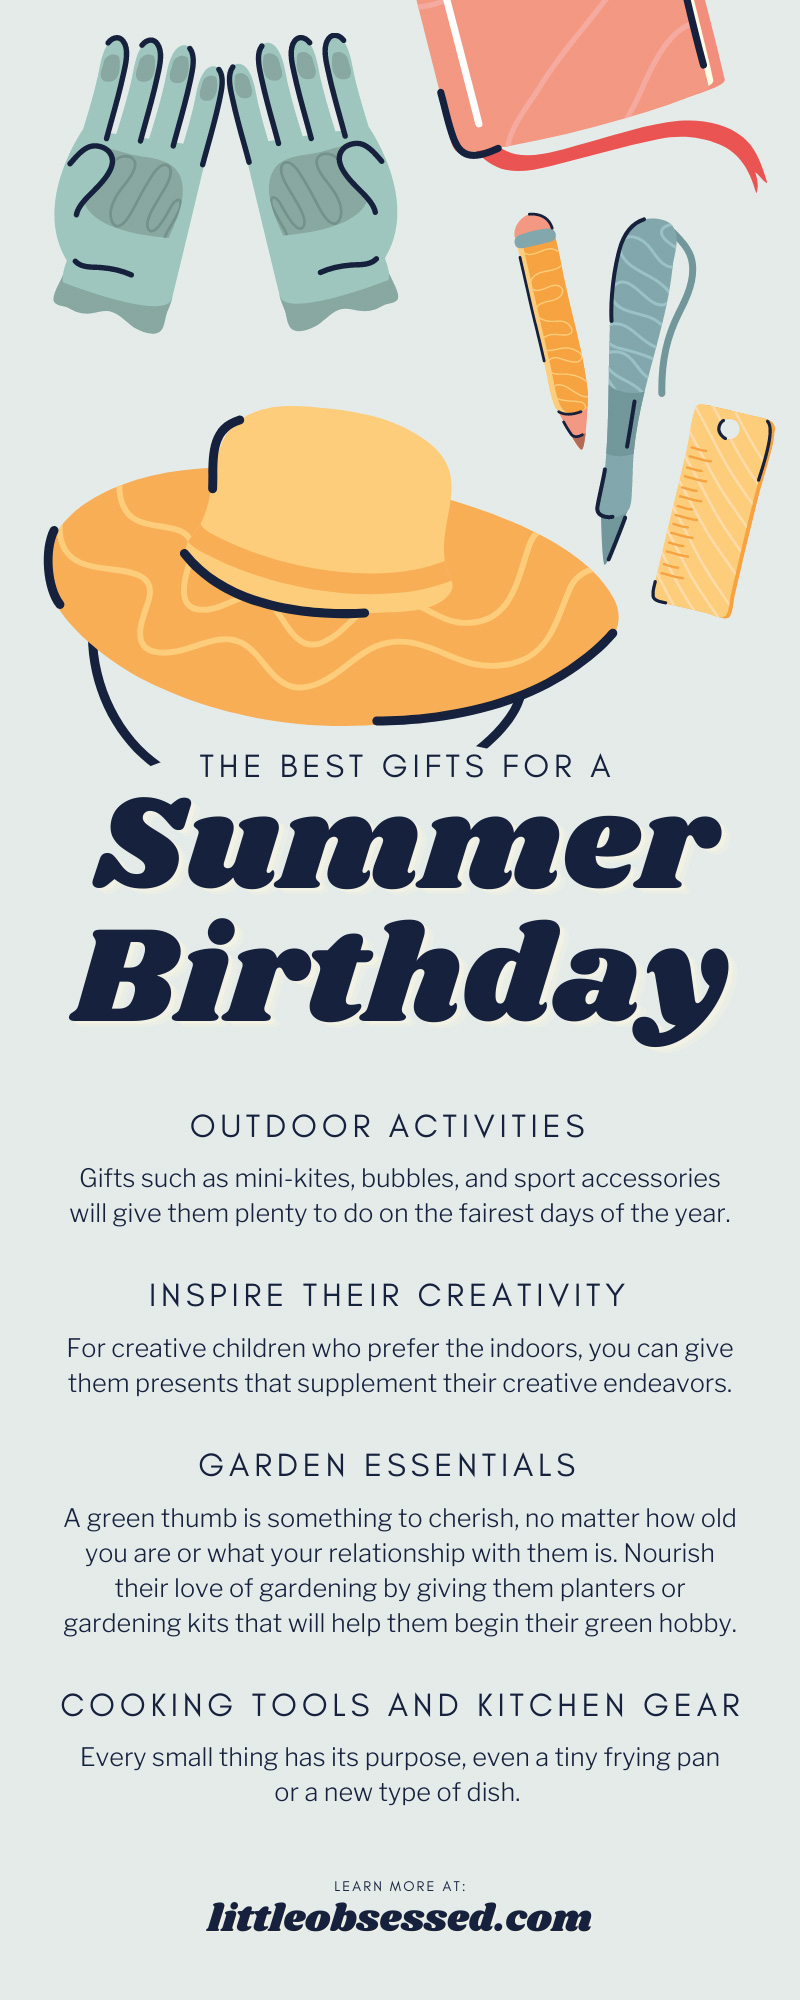 The Best Gifts for a Summer Birthday